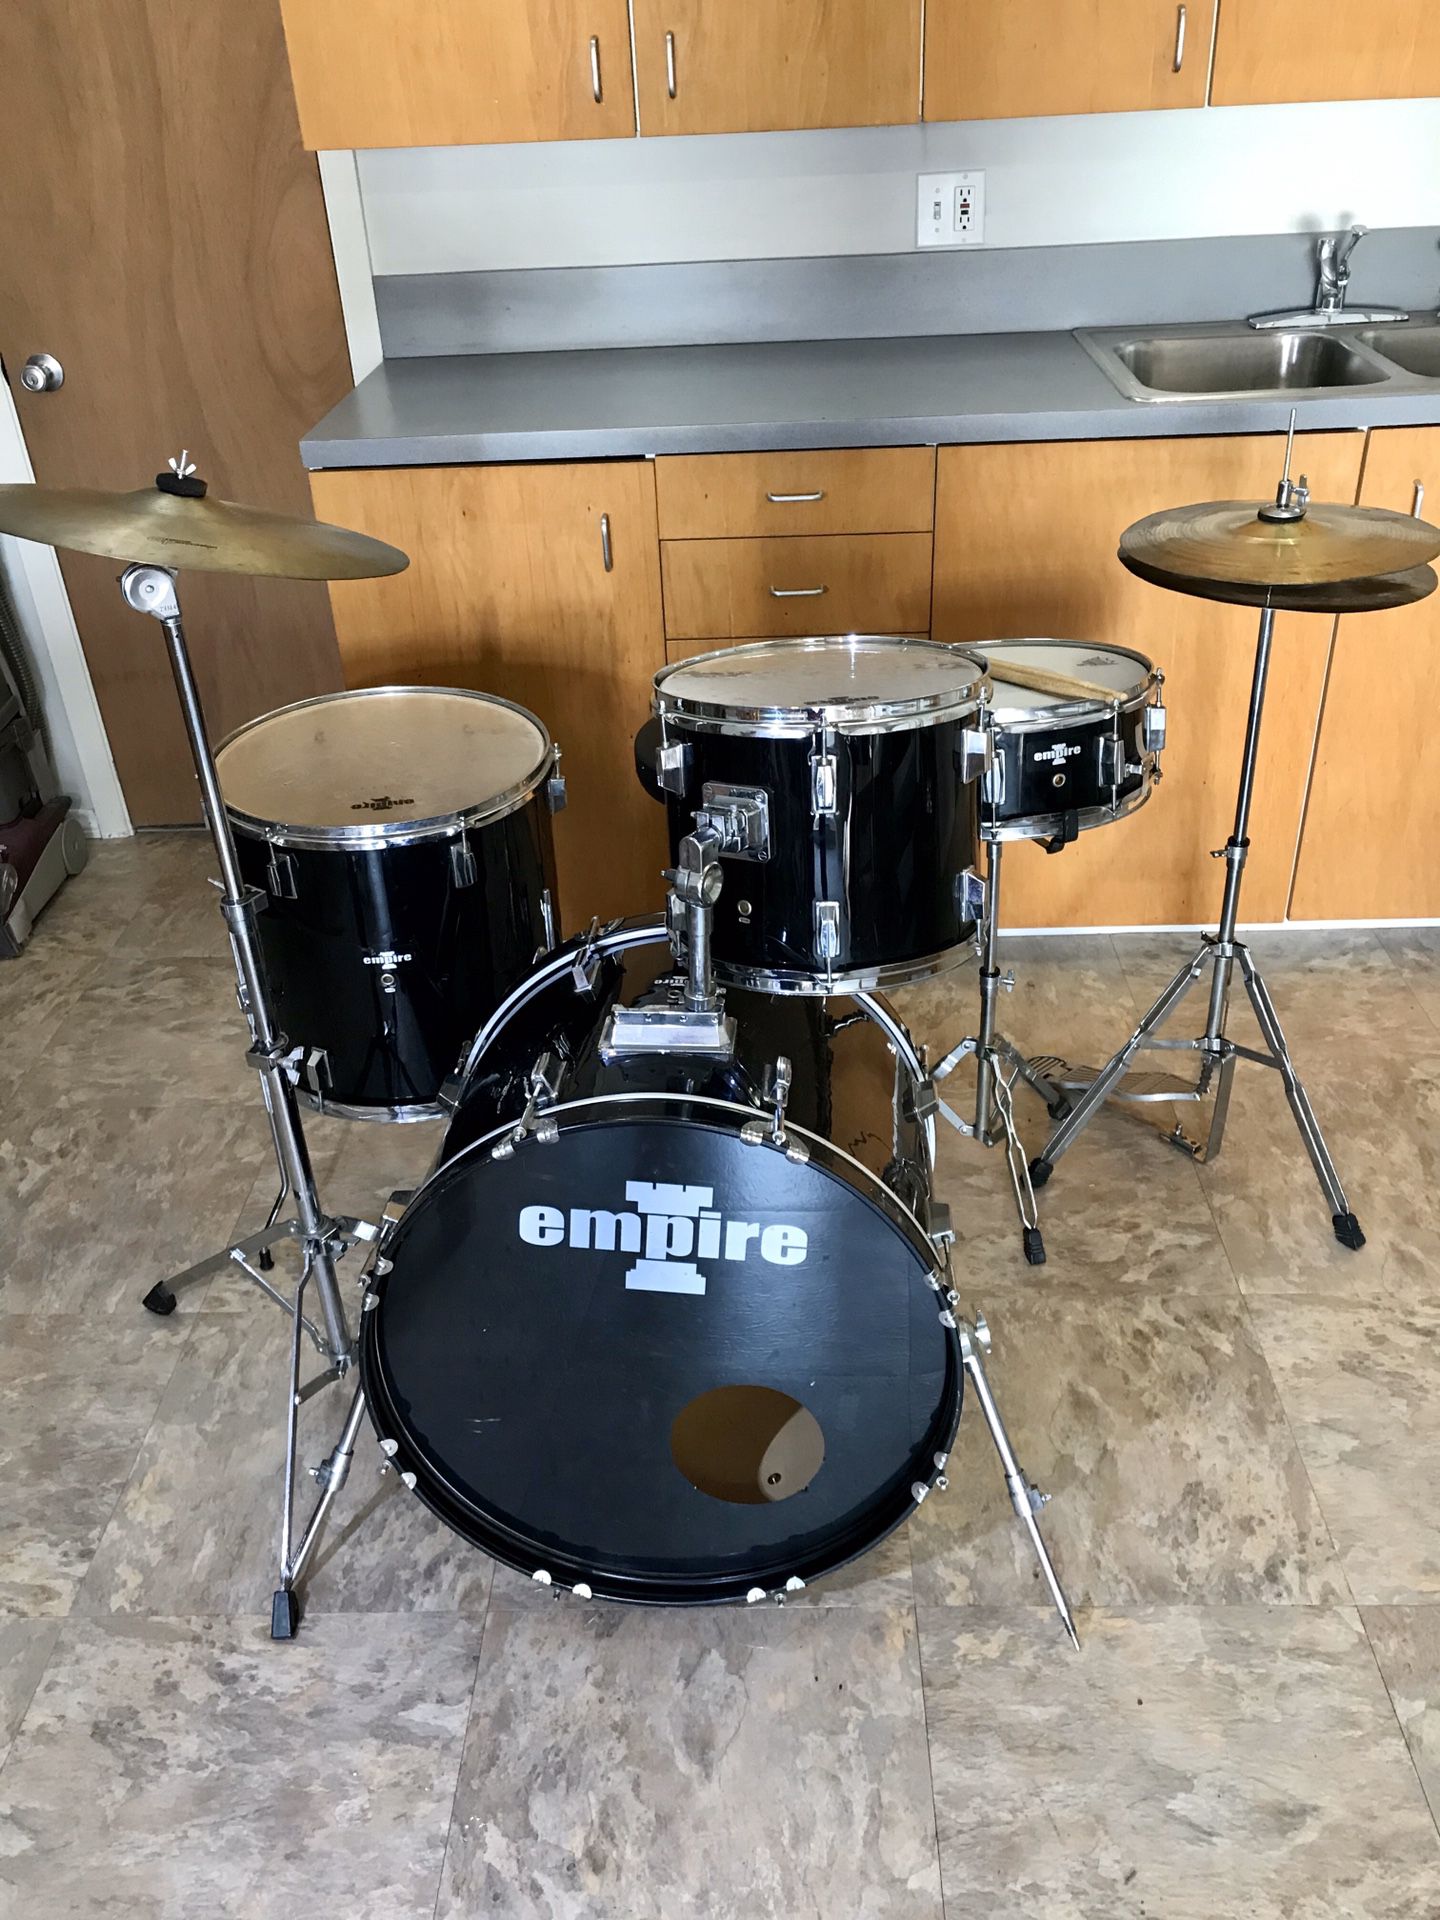 4 piece Empire black beginners drum set drums cymbals hihat bass pedal throne complete kit Ontario 91762 $175